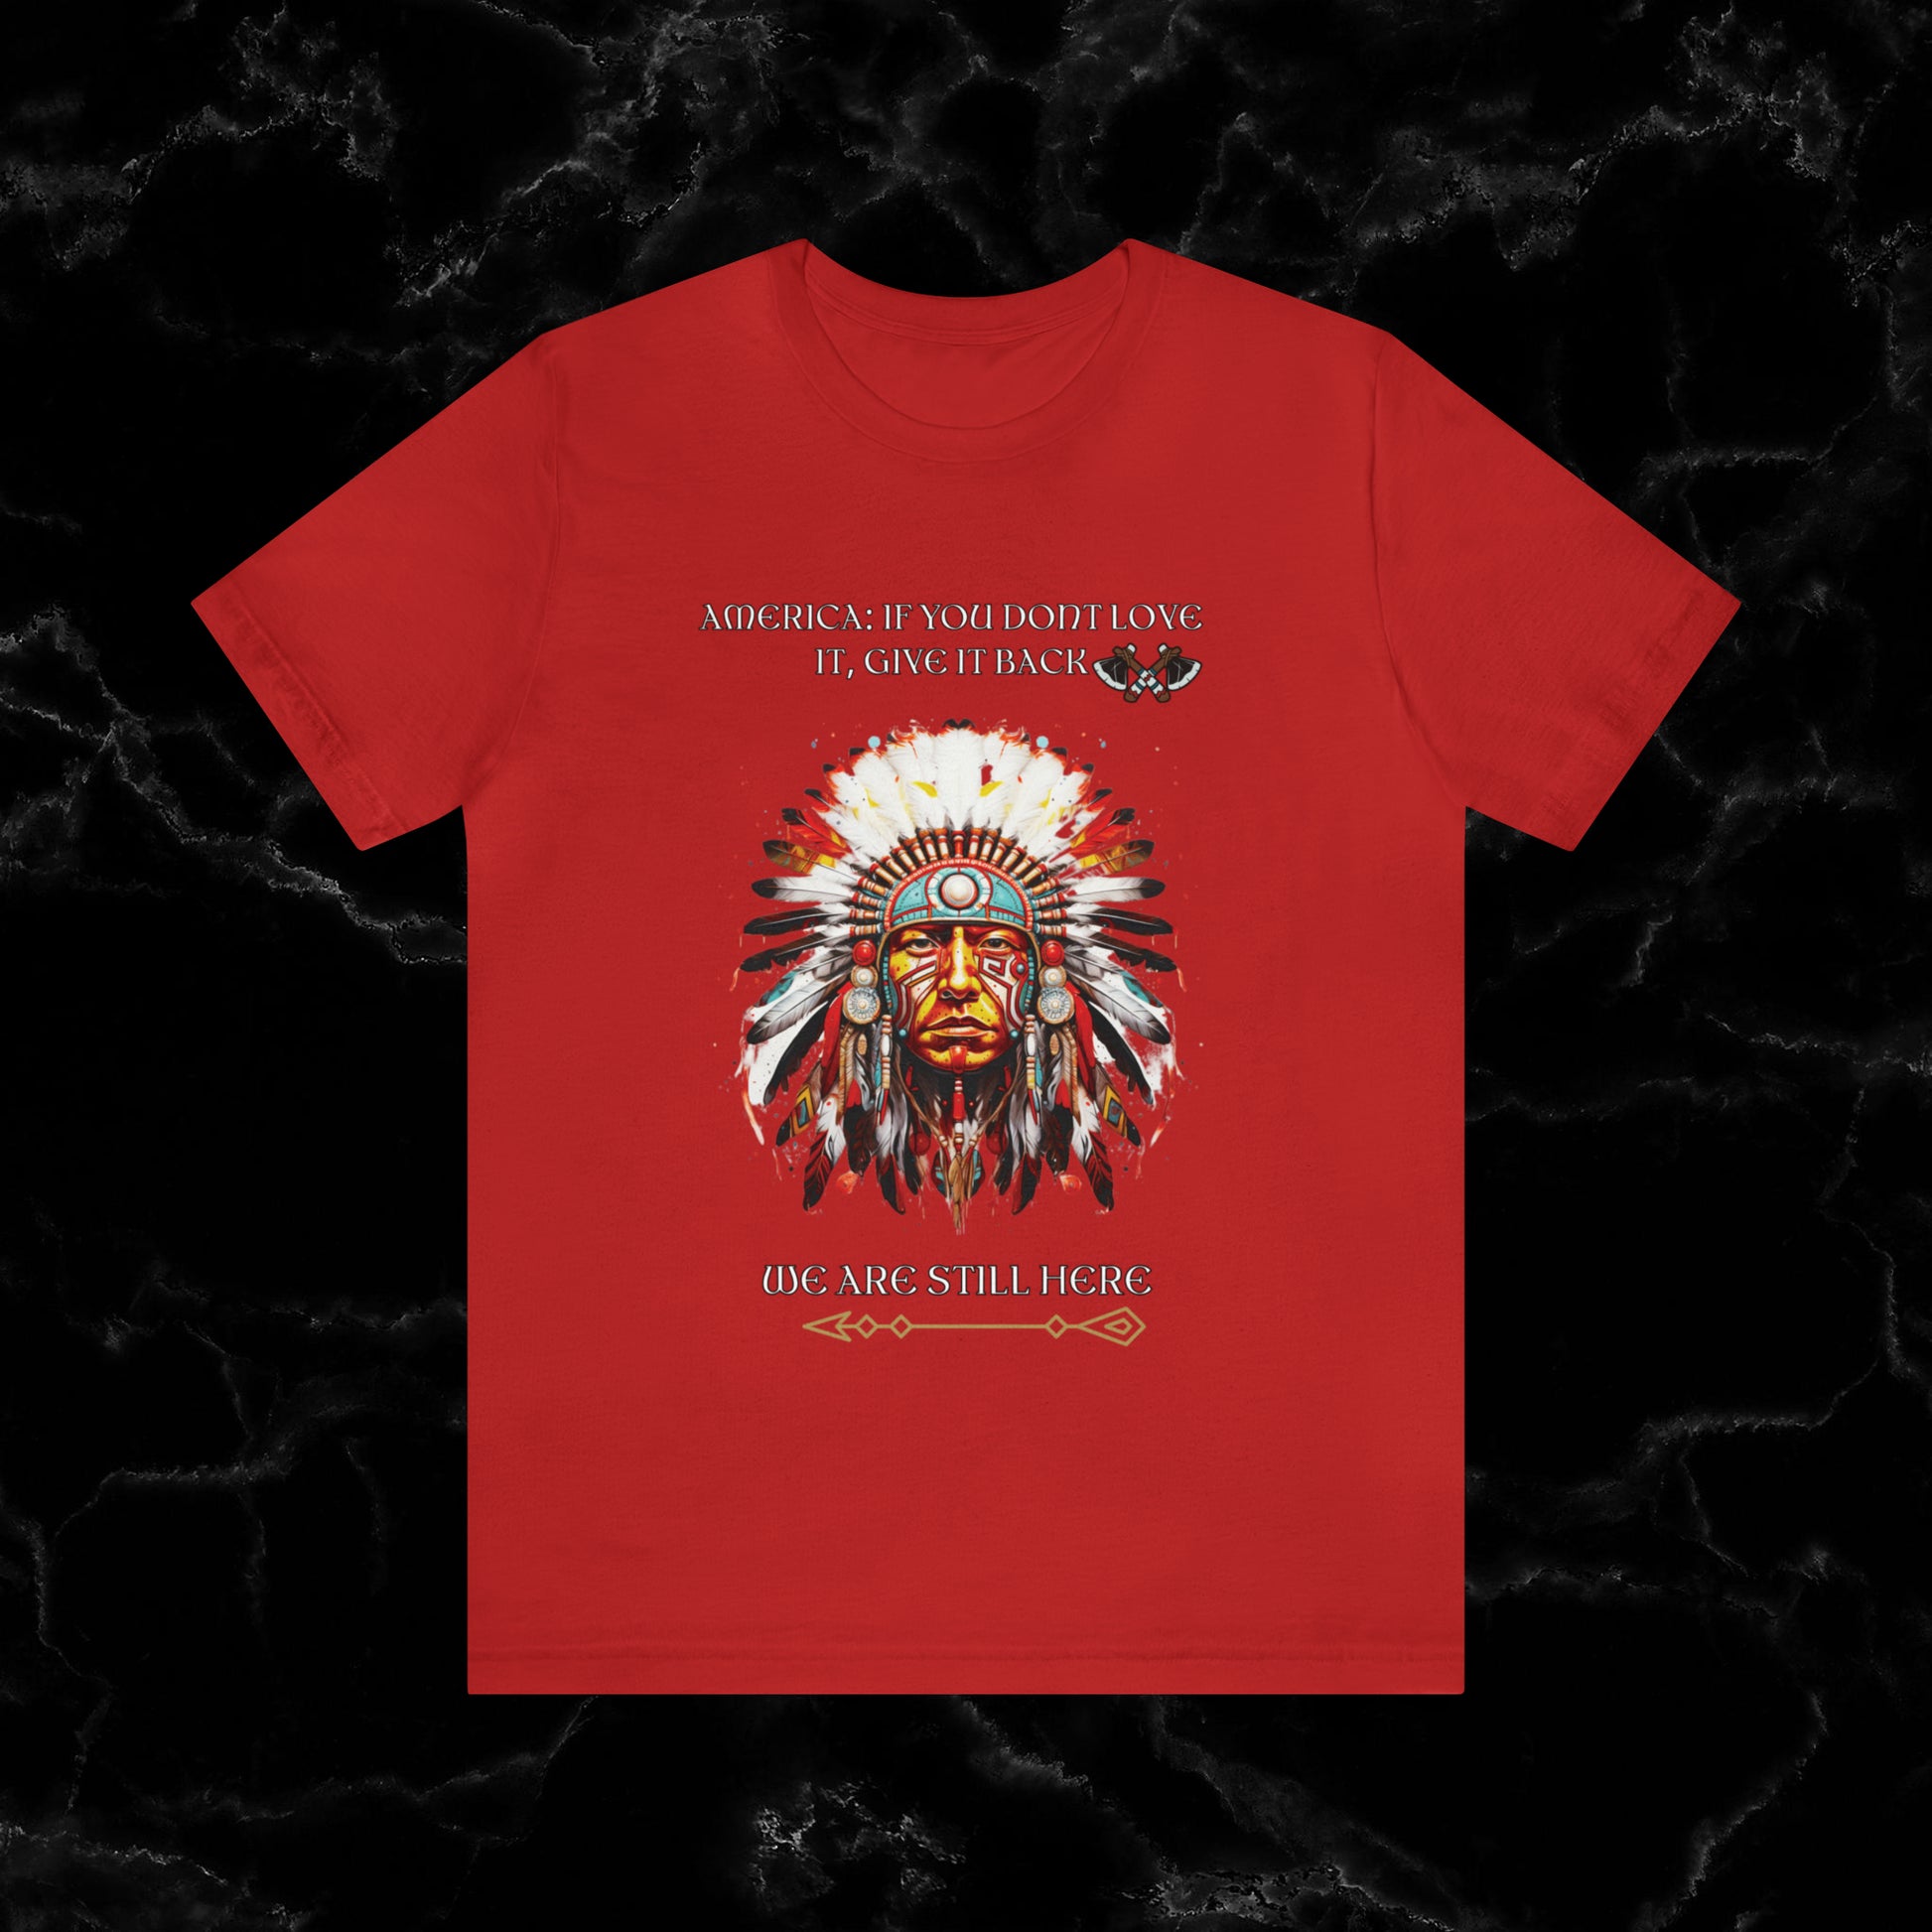 America Love it Or Give It Back Vintage T-Shirt - Indigenous Native Shirt T-Shirt Red S 